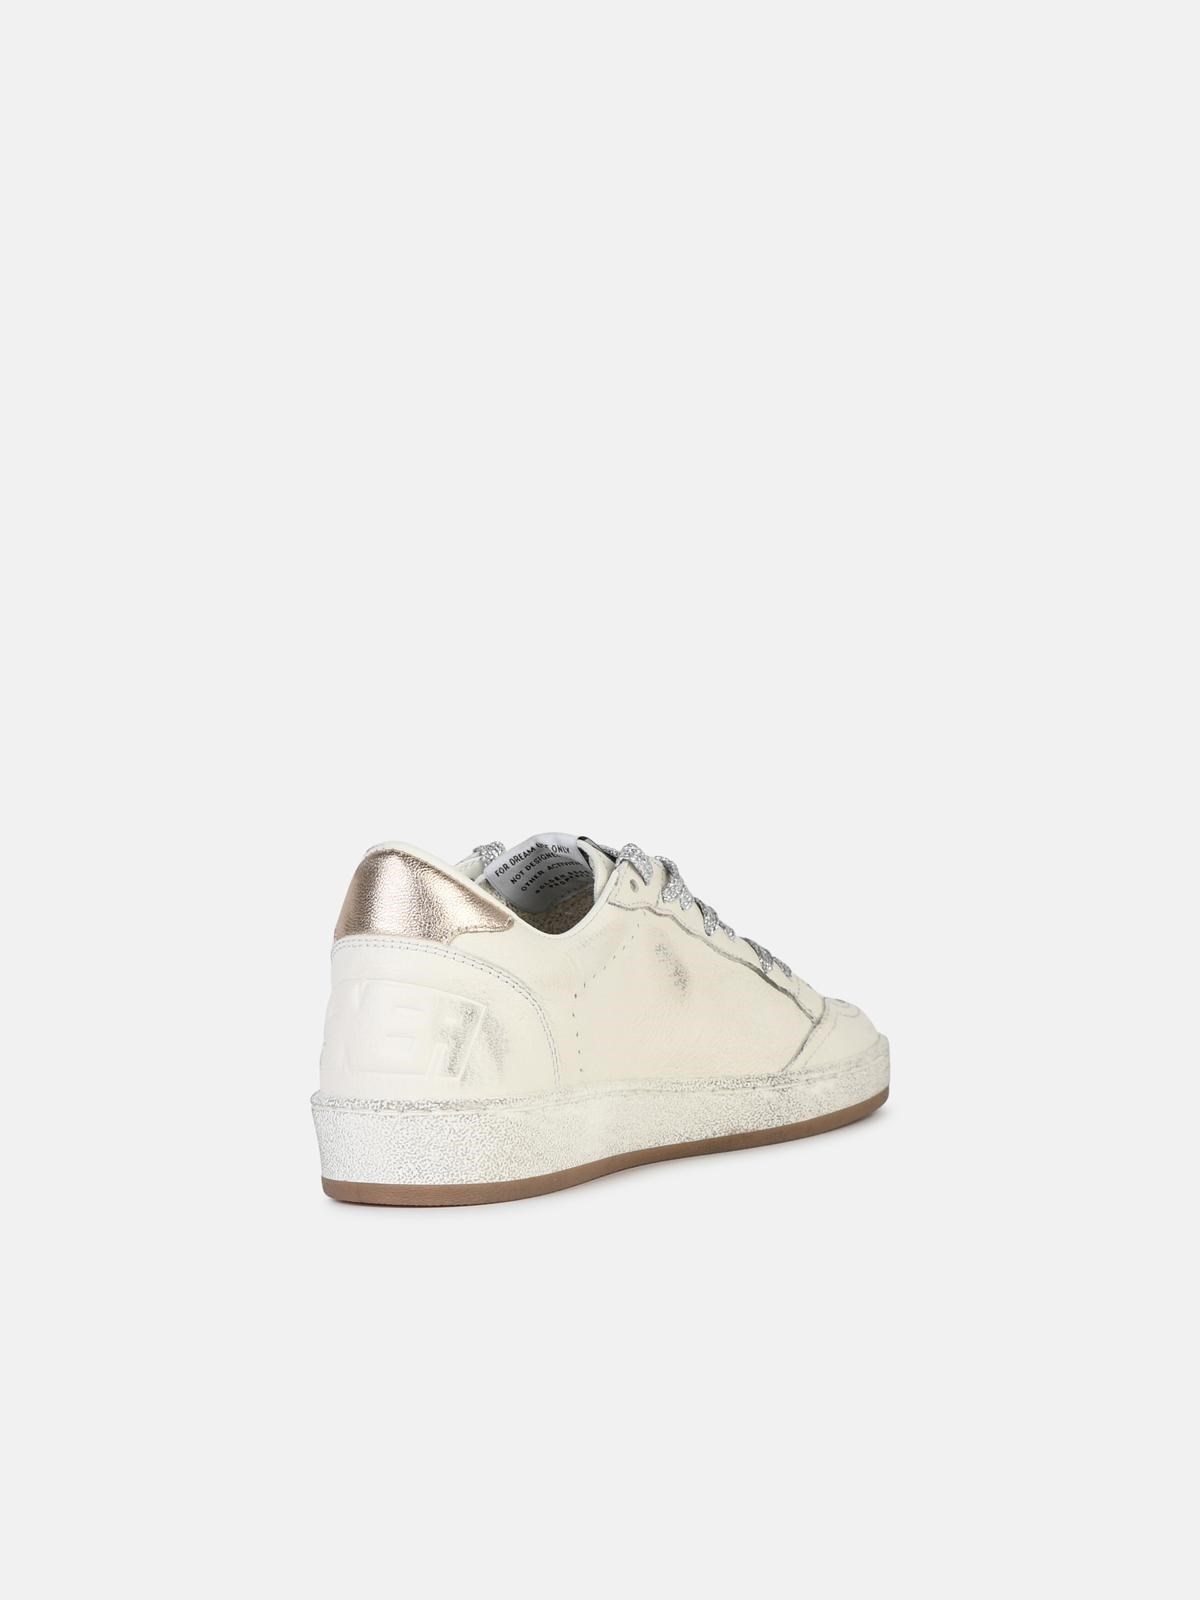 'BALL STAR' WHITE LEATHER SNEAKERS - 3